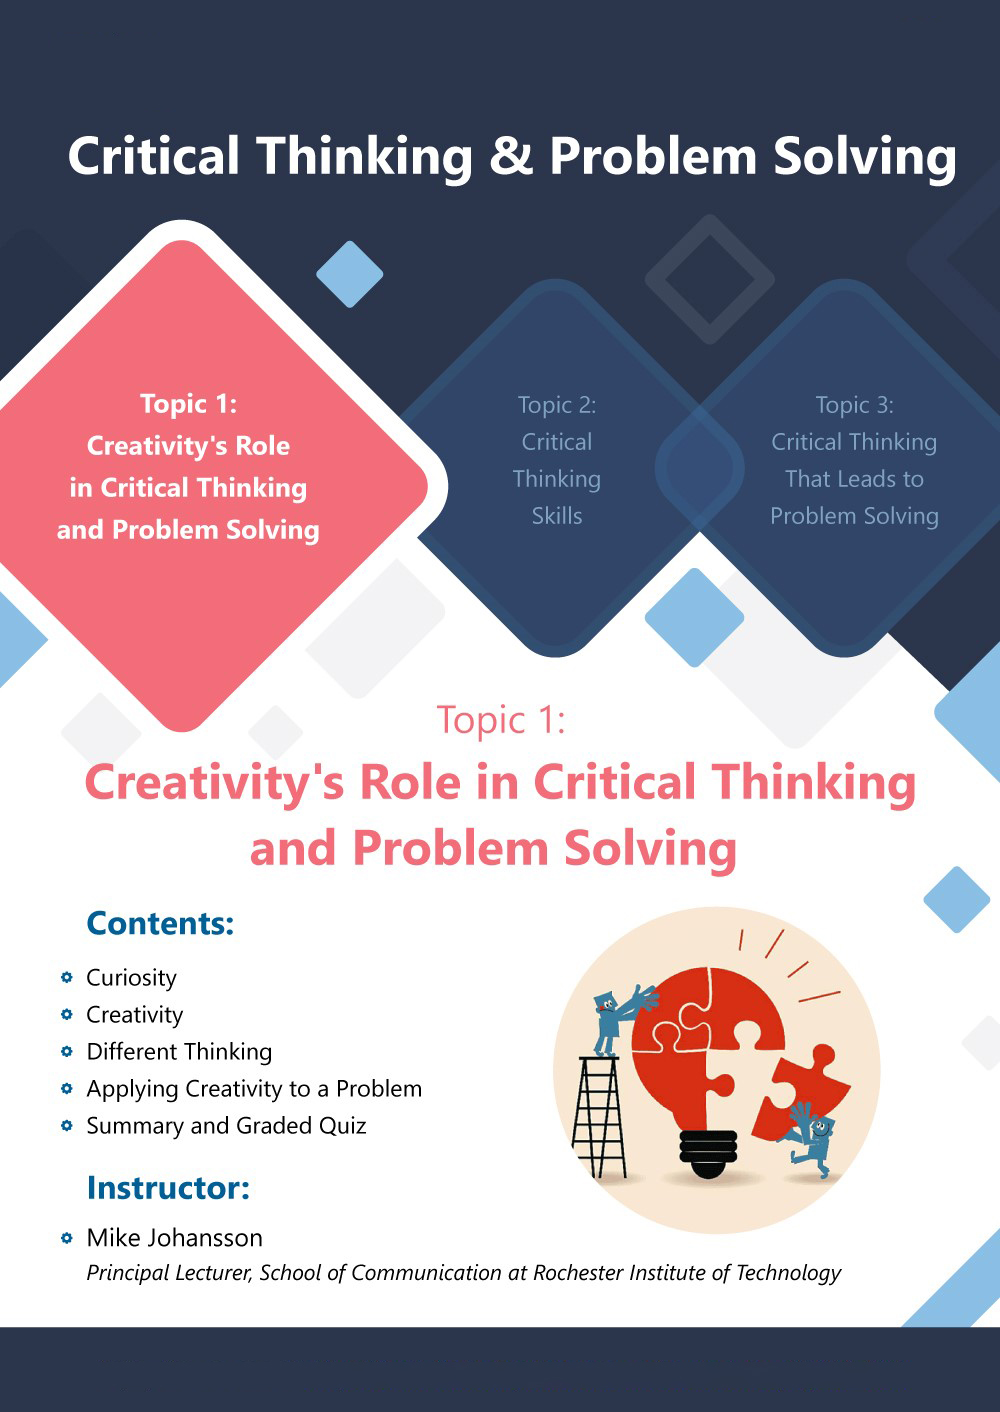 differentiate between problem solving and critical thinking